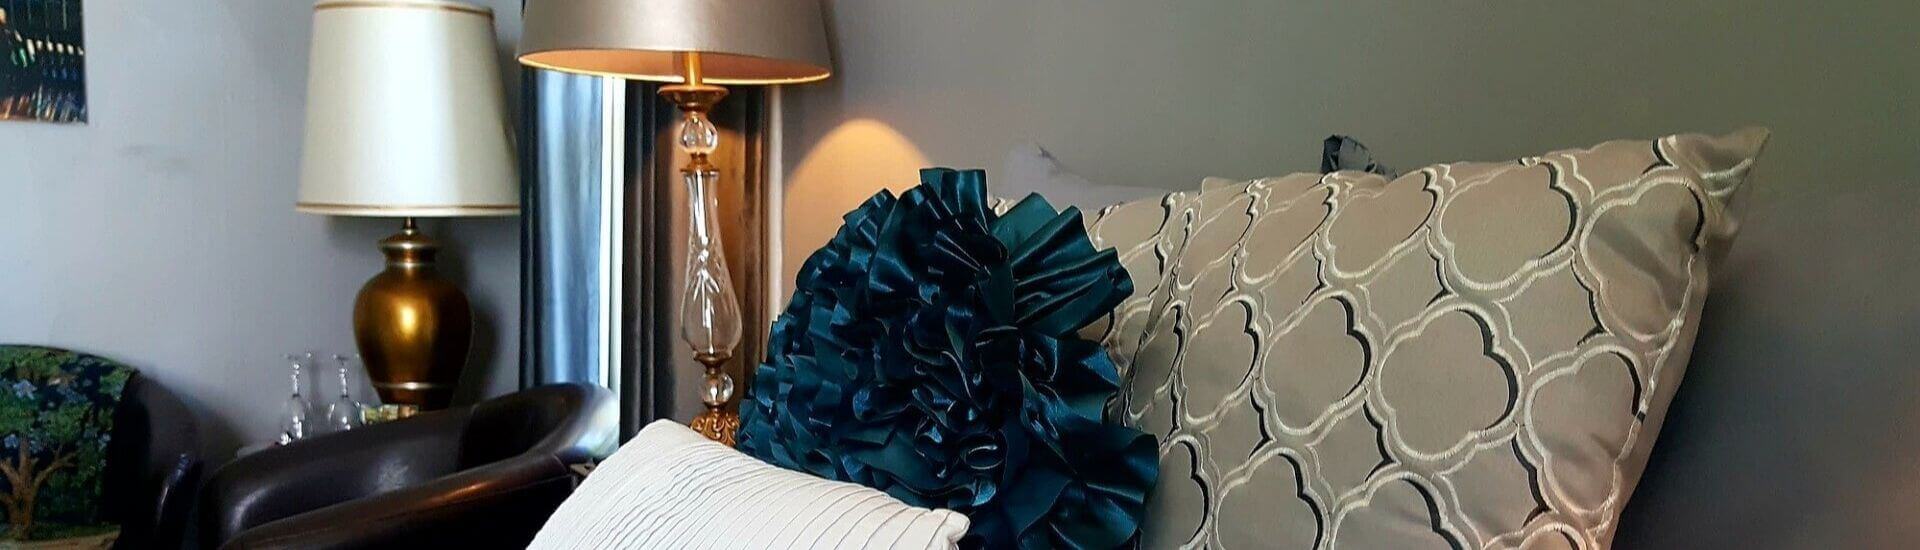 Teal and tan pillows on a bed next to a dark leather club chair and two decorative lamps